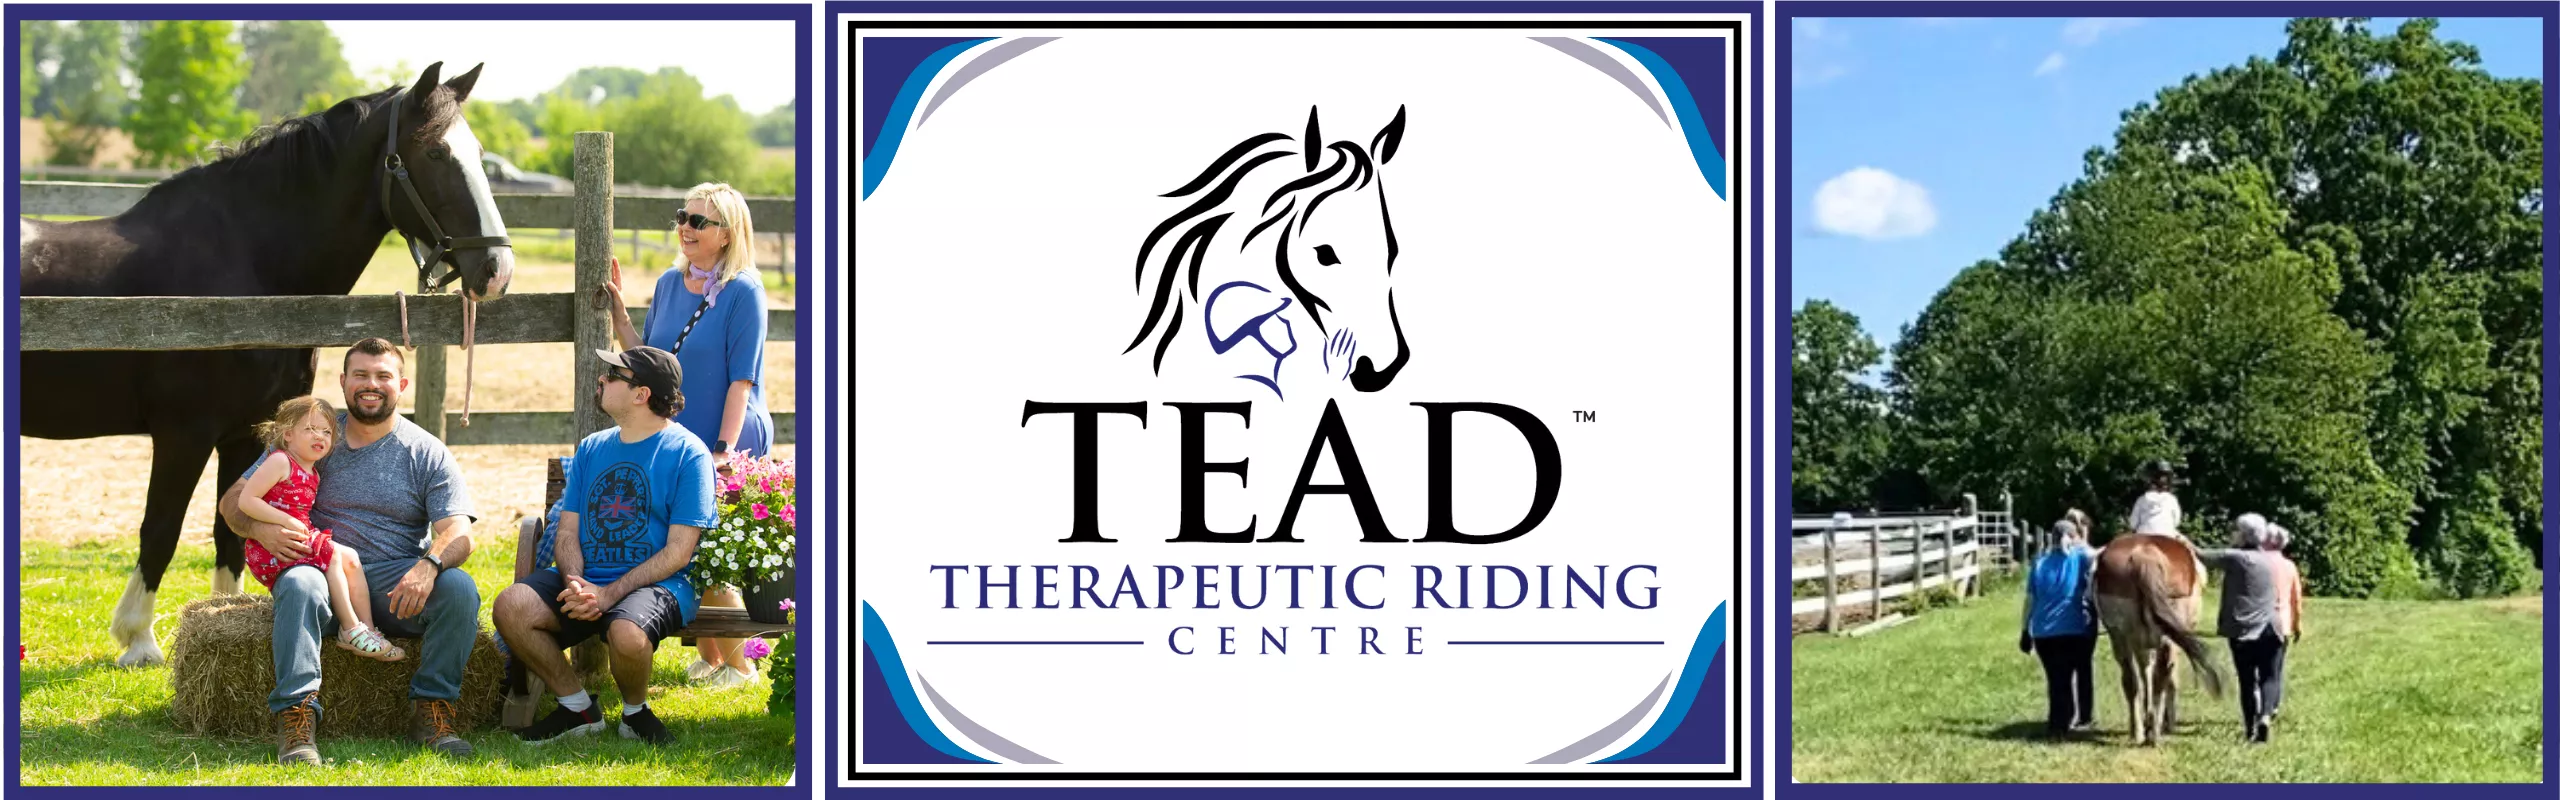 Welcome to TEAD Therapeutic Riding Centre